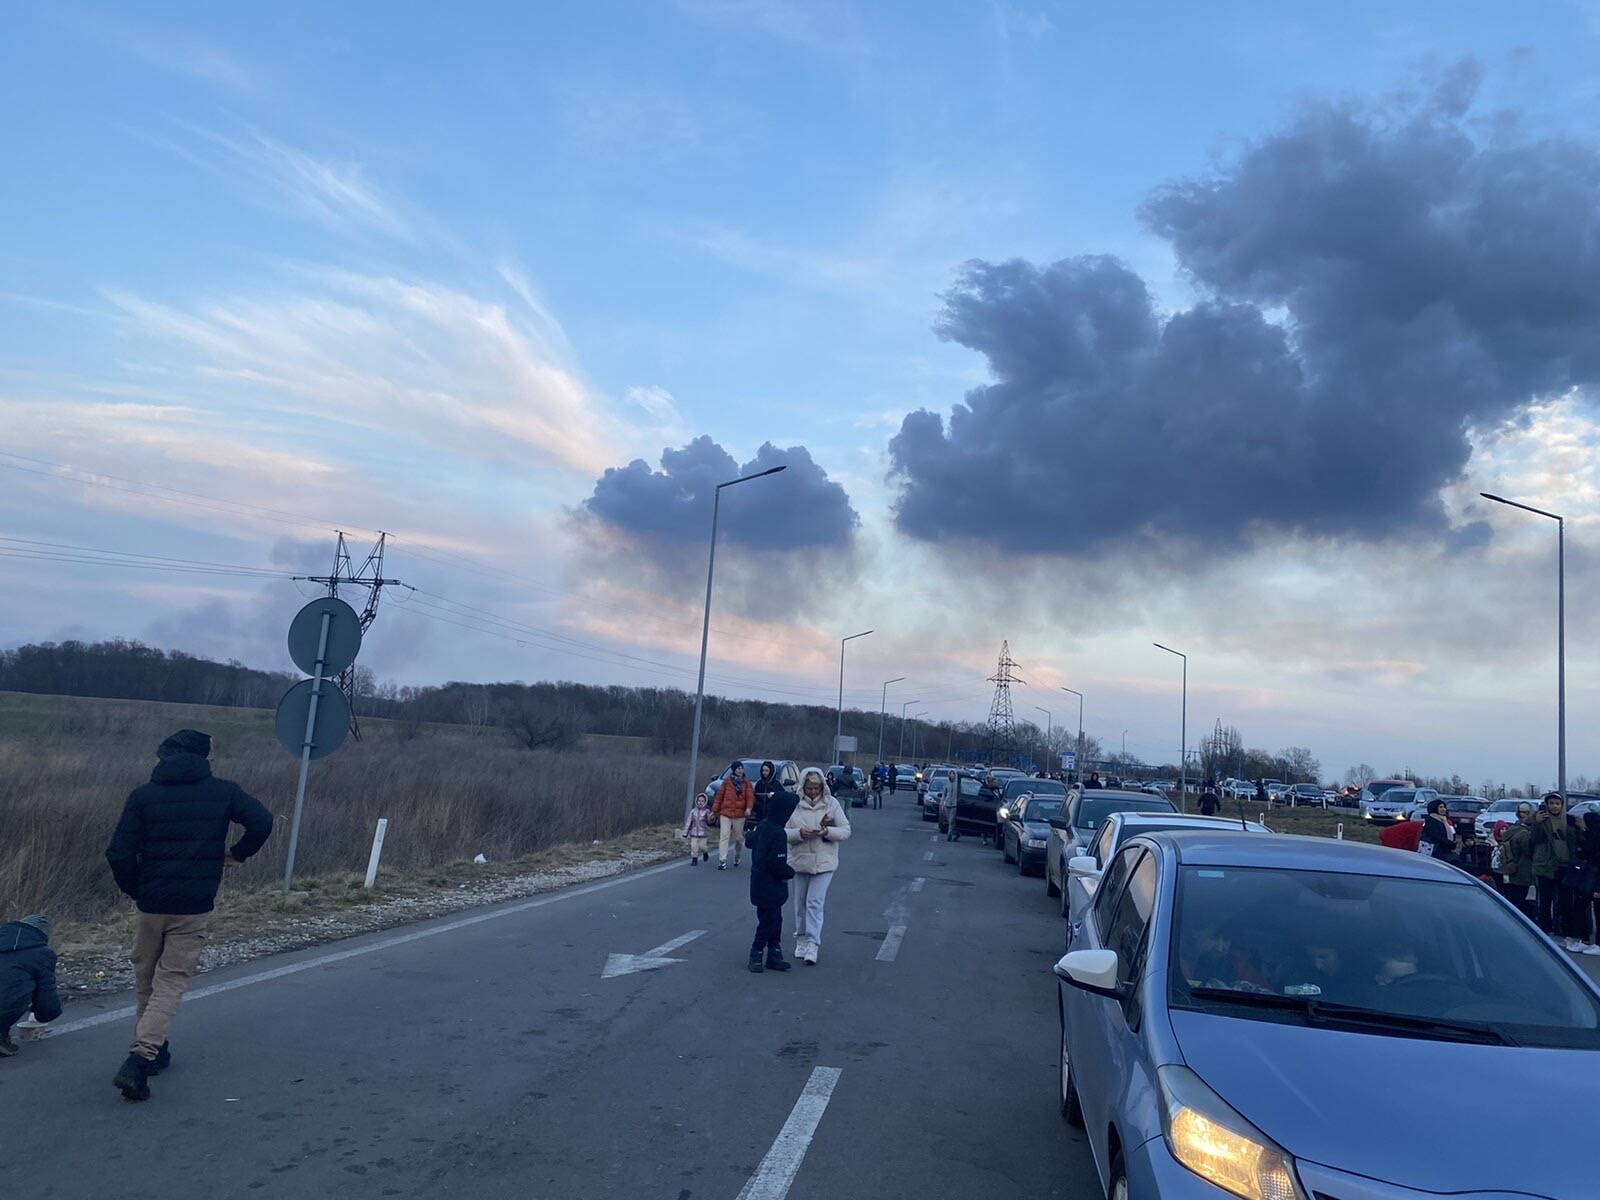 Traffic the family bumped into while trying to reach the Moldovan border. Courtesy of Valeriia Horodnycha.